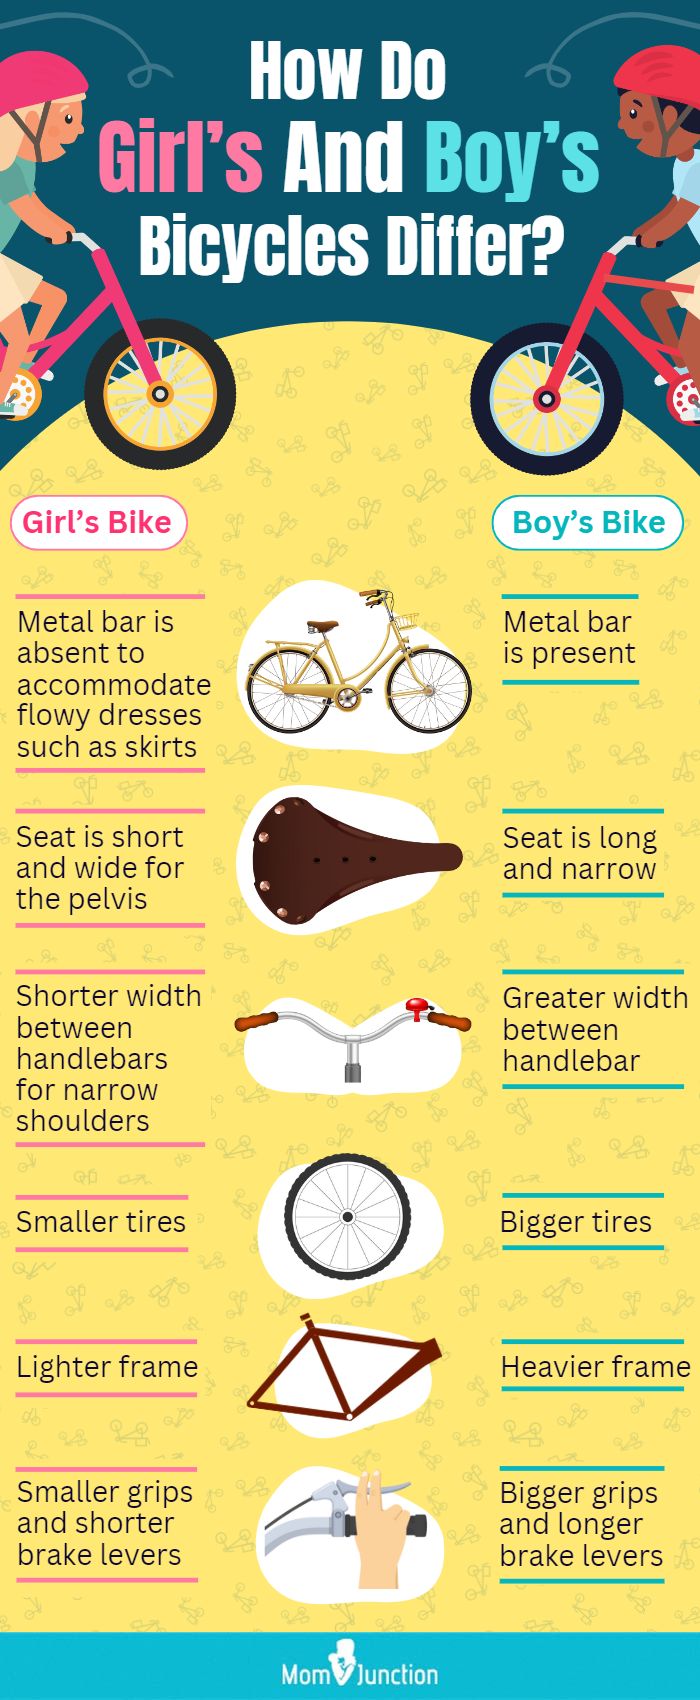 How Do Girl’s And Boy’s Bicycles Diffe (infographic)